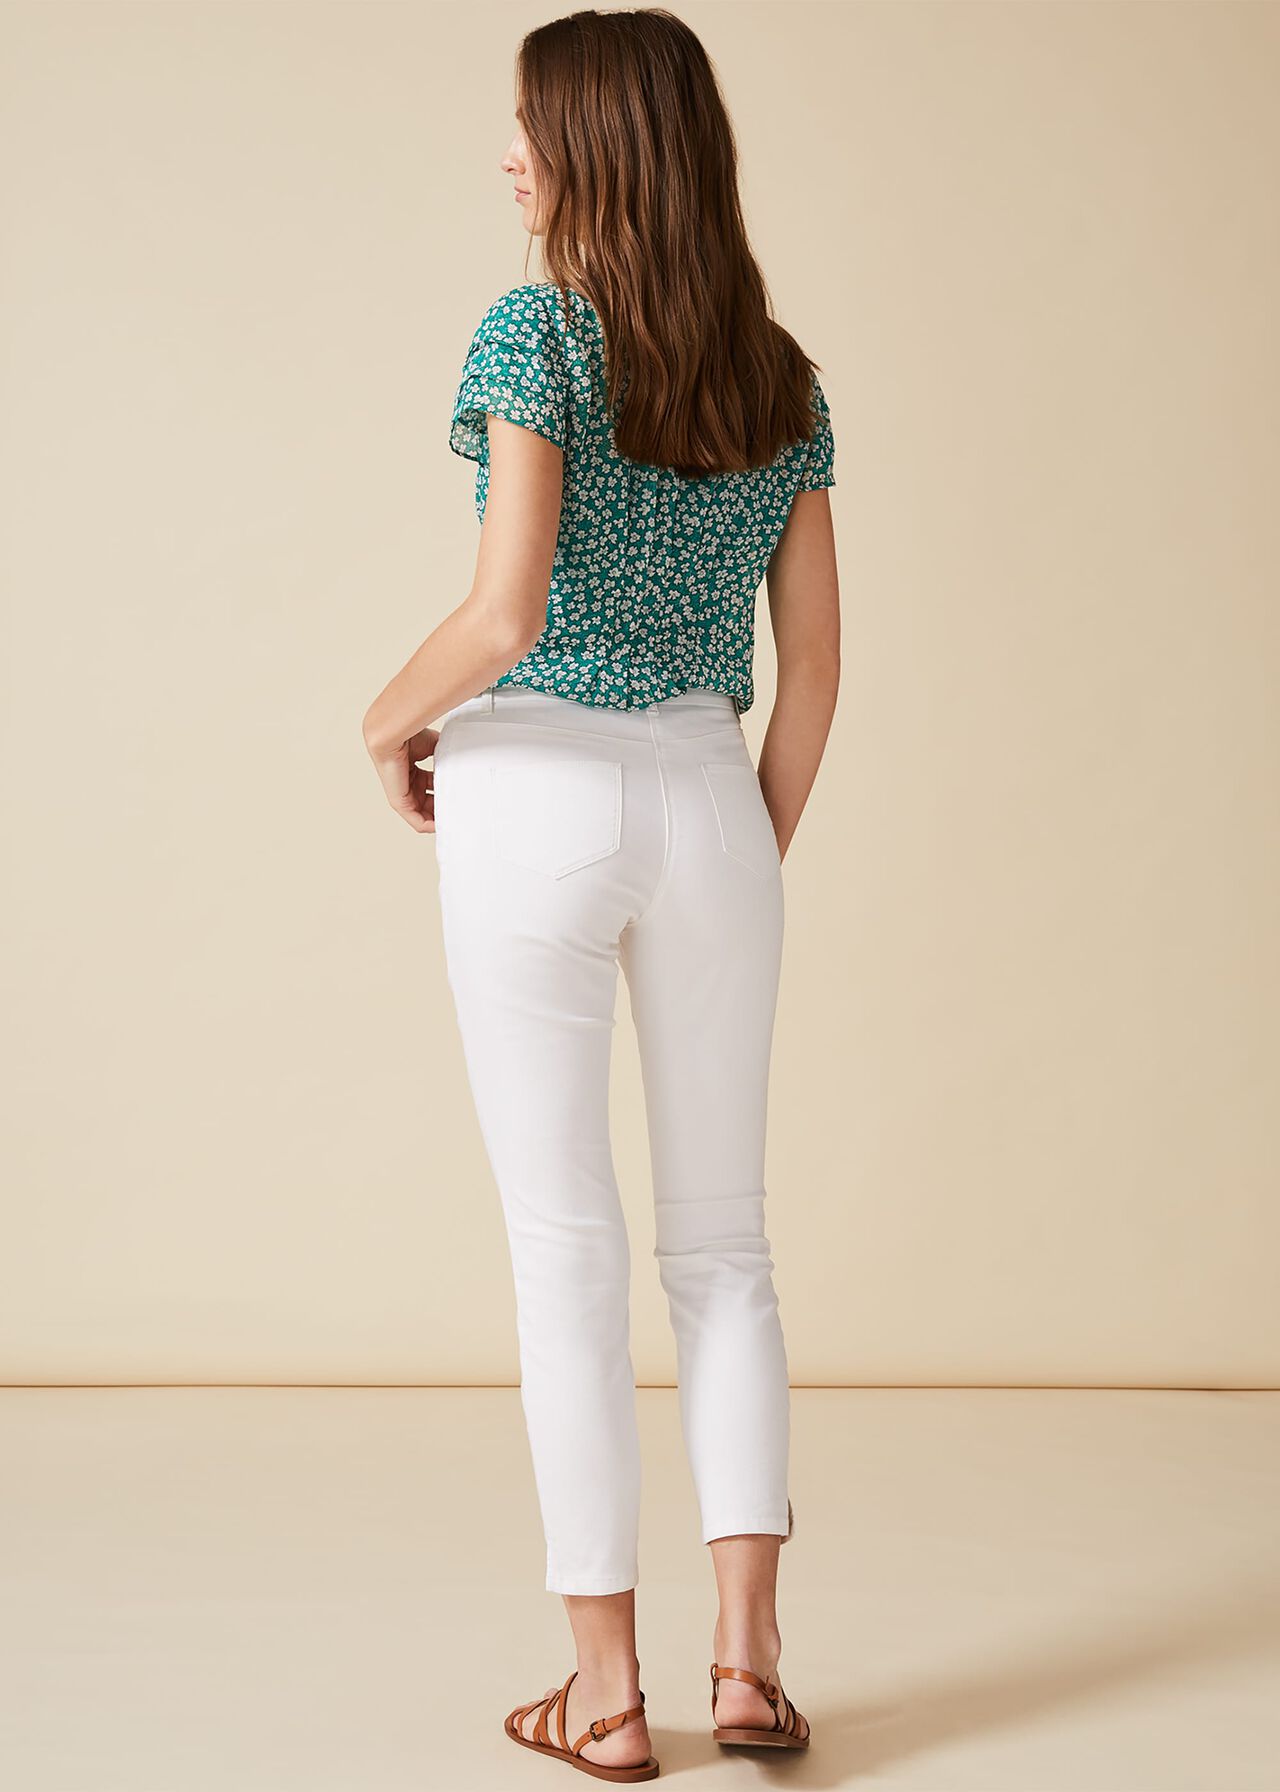 Emerly Slim Fit 7/8th Jeans